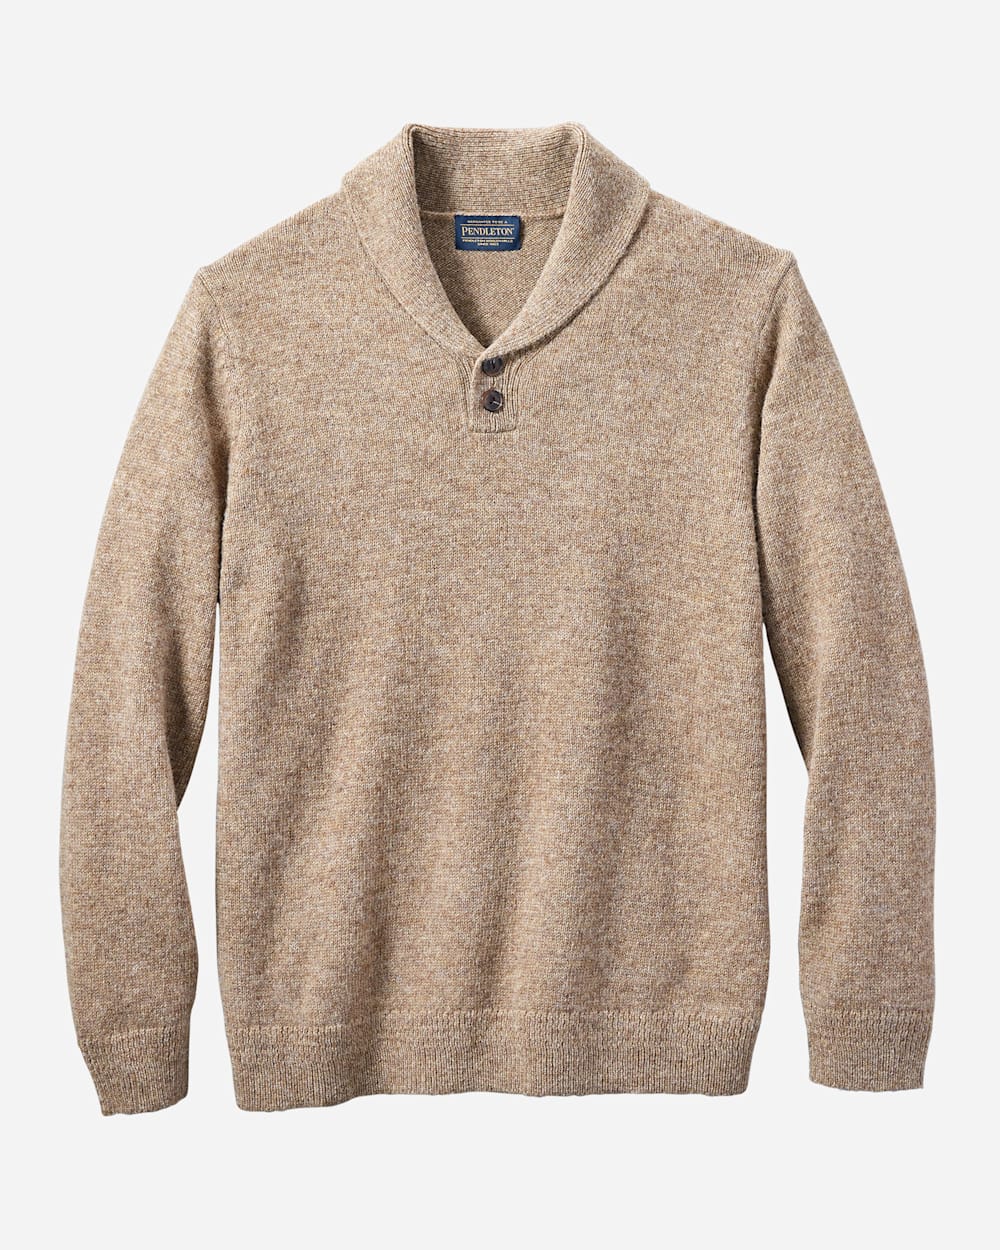 ALTERNATE VIEW OF MEN'S SHETLAND SHAWL PULLOVER IN COYOTE TAN HEATHER image number 4